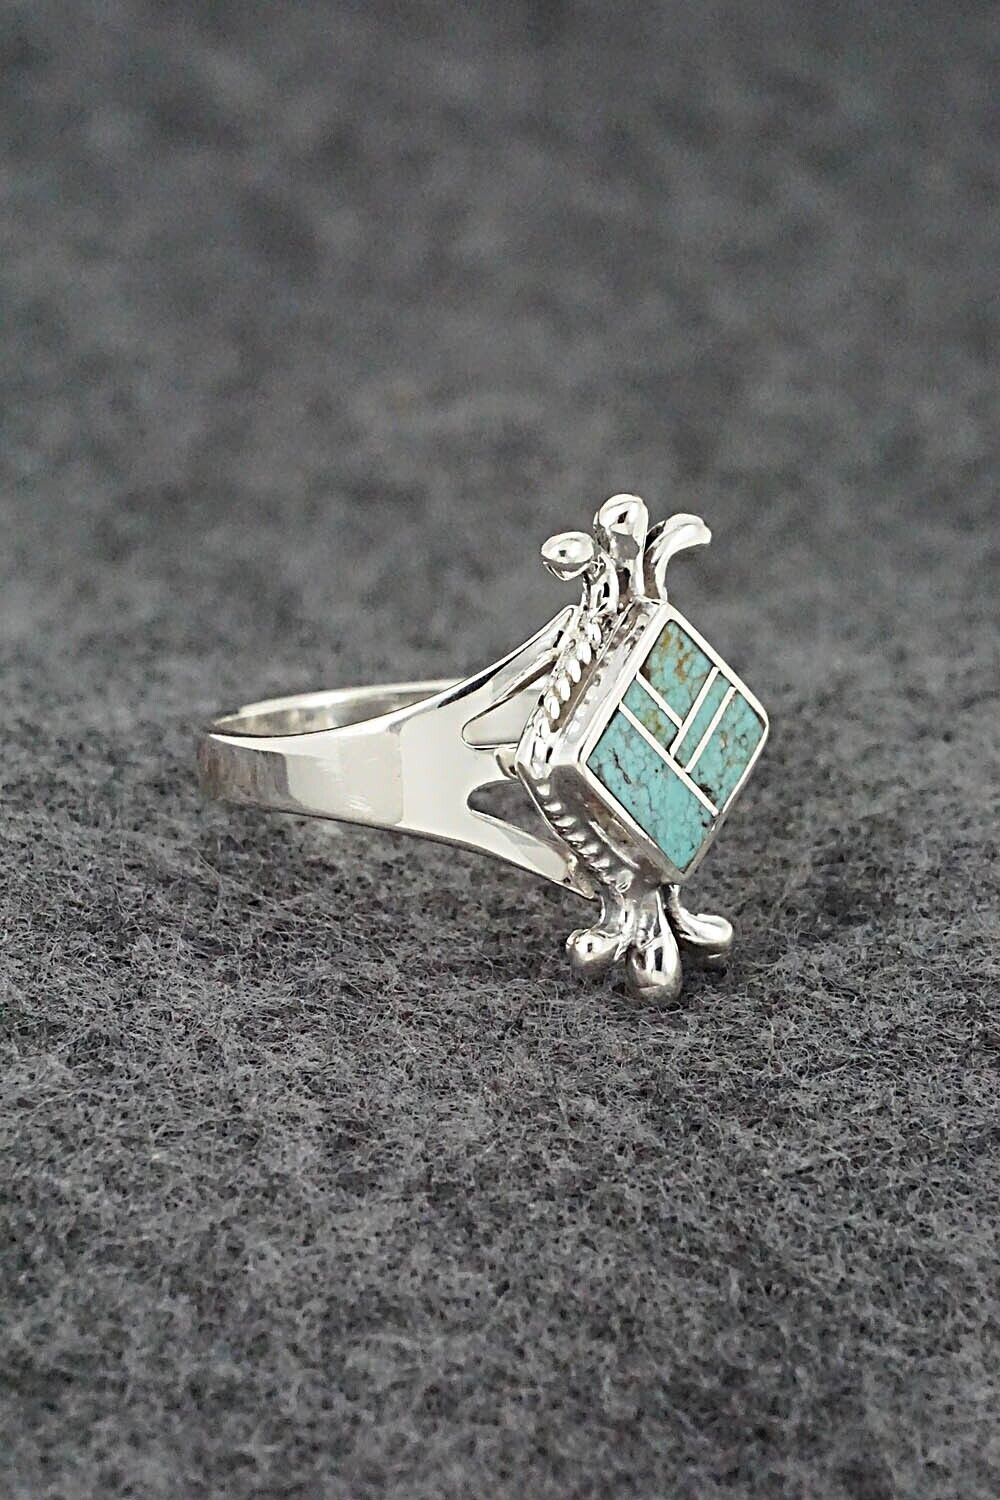 Turquoise & Sterling Silver Inlay Ring - James Manygoats - Size 9